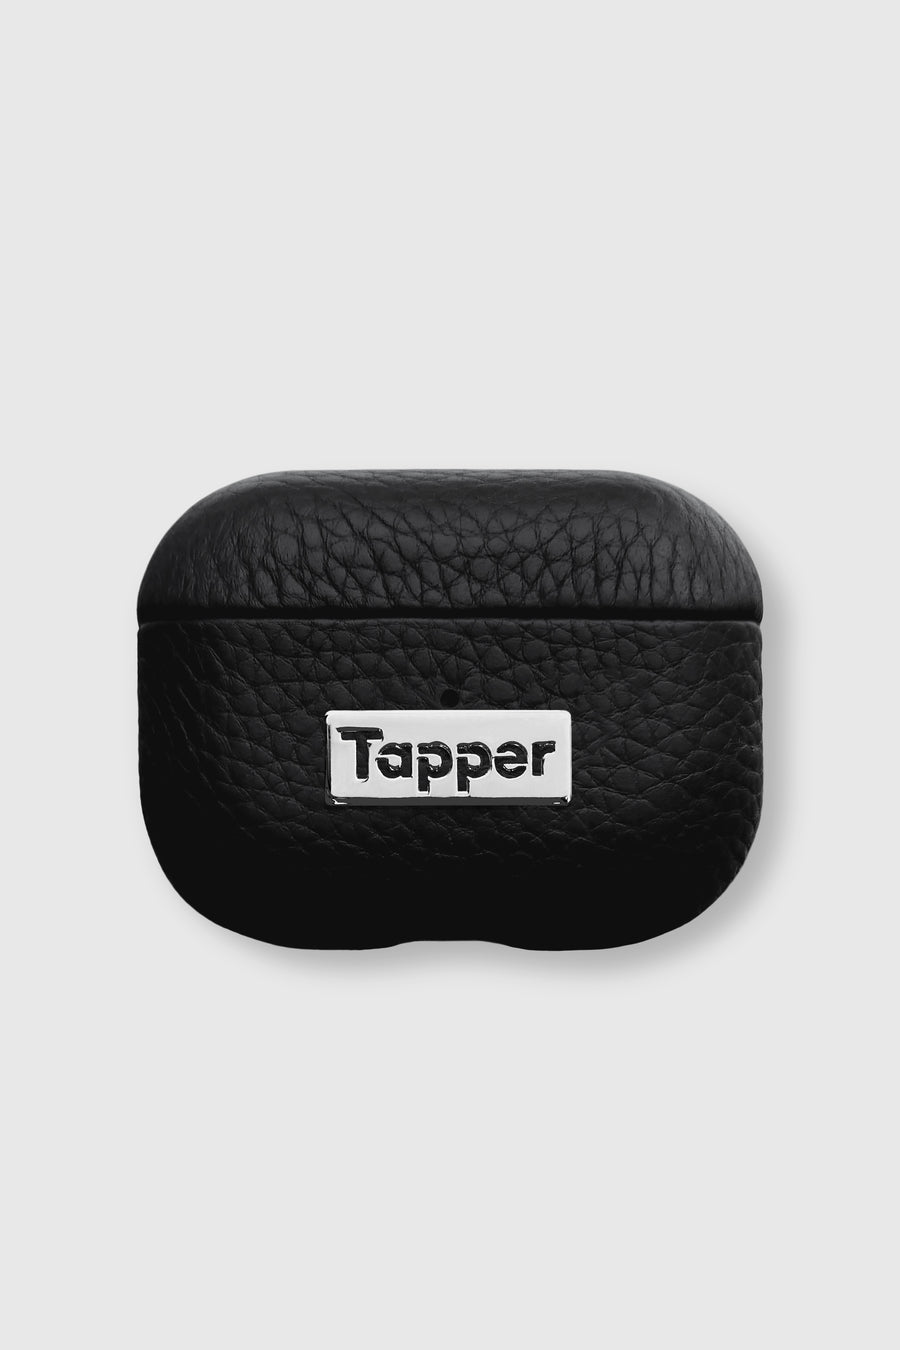 Tapper's luxurious black genuine lamb leather AirPods case protects and elevates the look of your AirPods Pro. The luxurious, protective case for AirPods Pro with a metal logo plate colored in silver steps up your AirPods game. The next must-have high end protective Apple AirPods accessory in real leather and metal details. Compatible with AirPods Pro. Designed in Sweden by Tapper. Free Express Shipping at gettapper.com